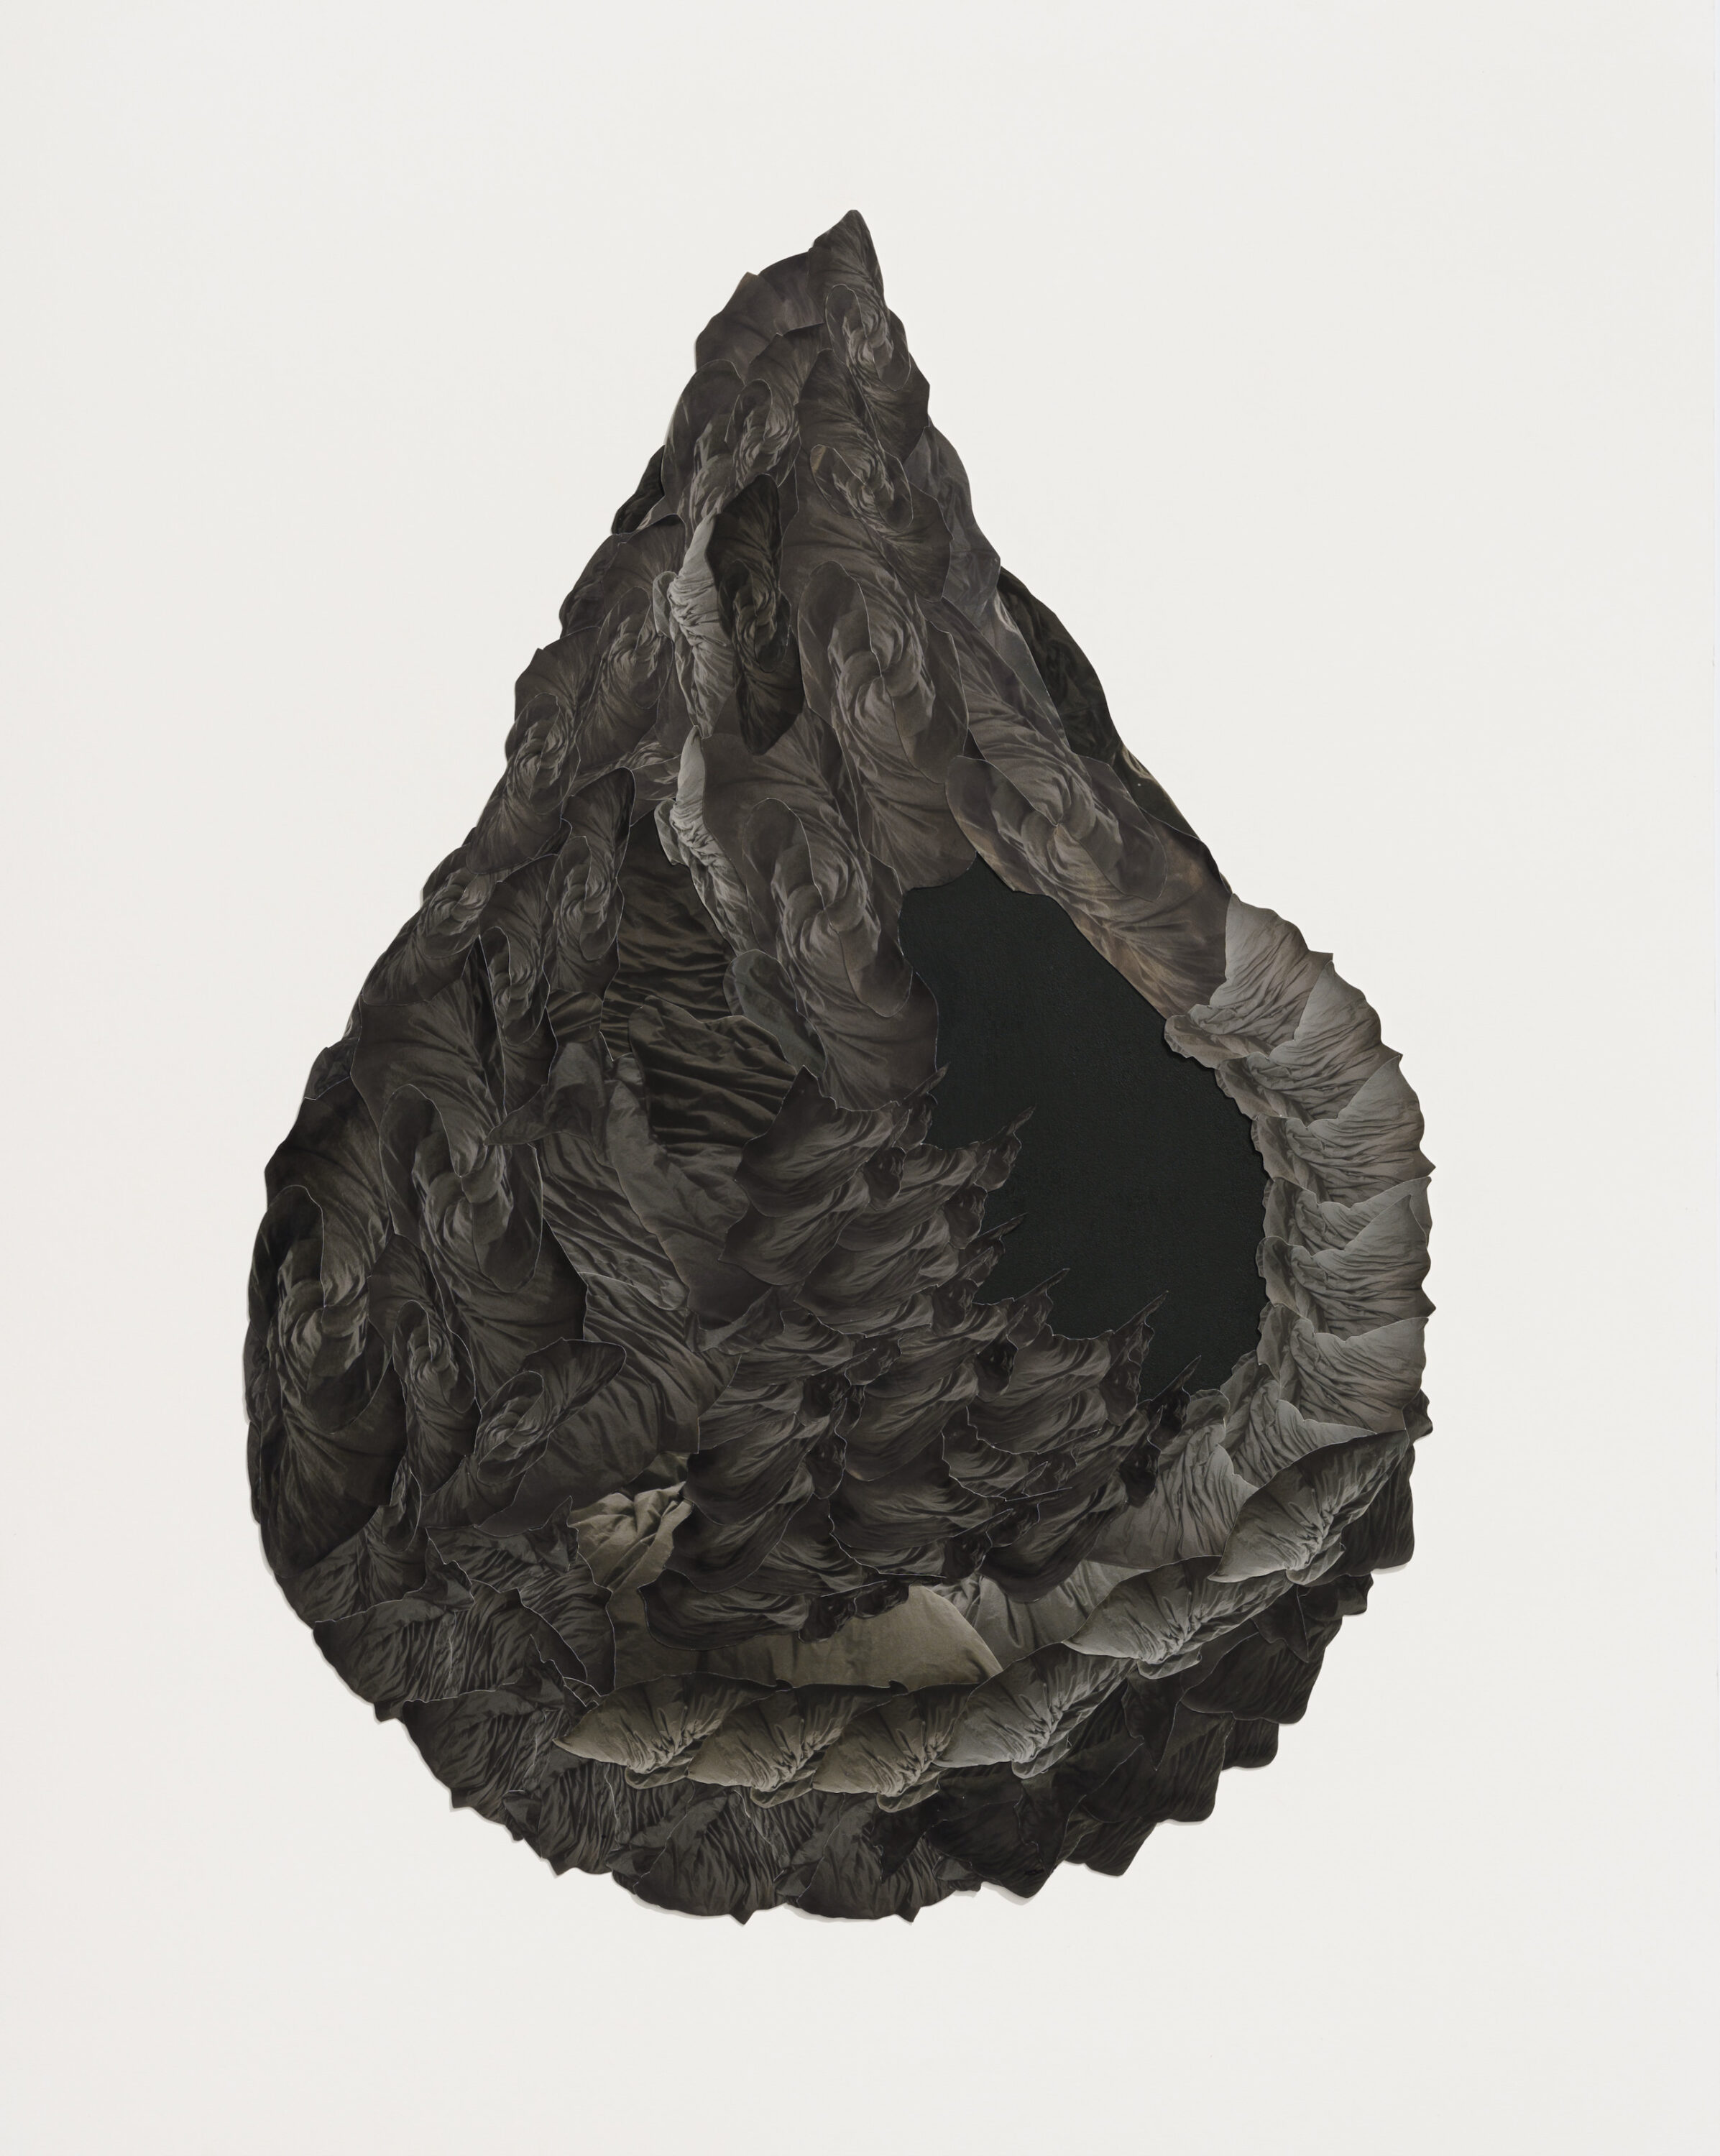 A black work in the shape of a teardrop on a white background. The object has cavernous textures on its surface.